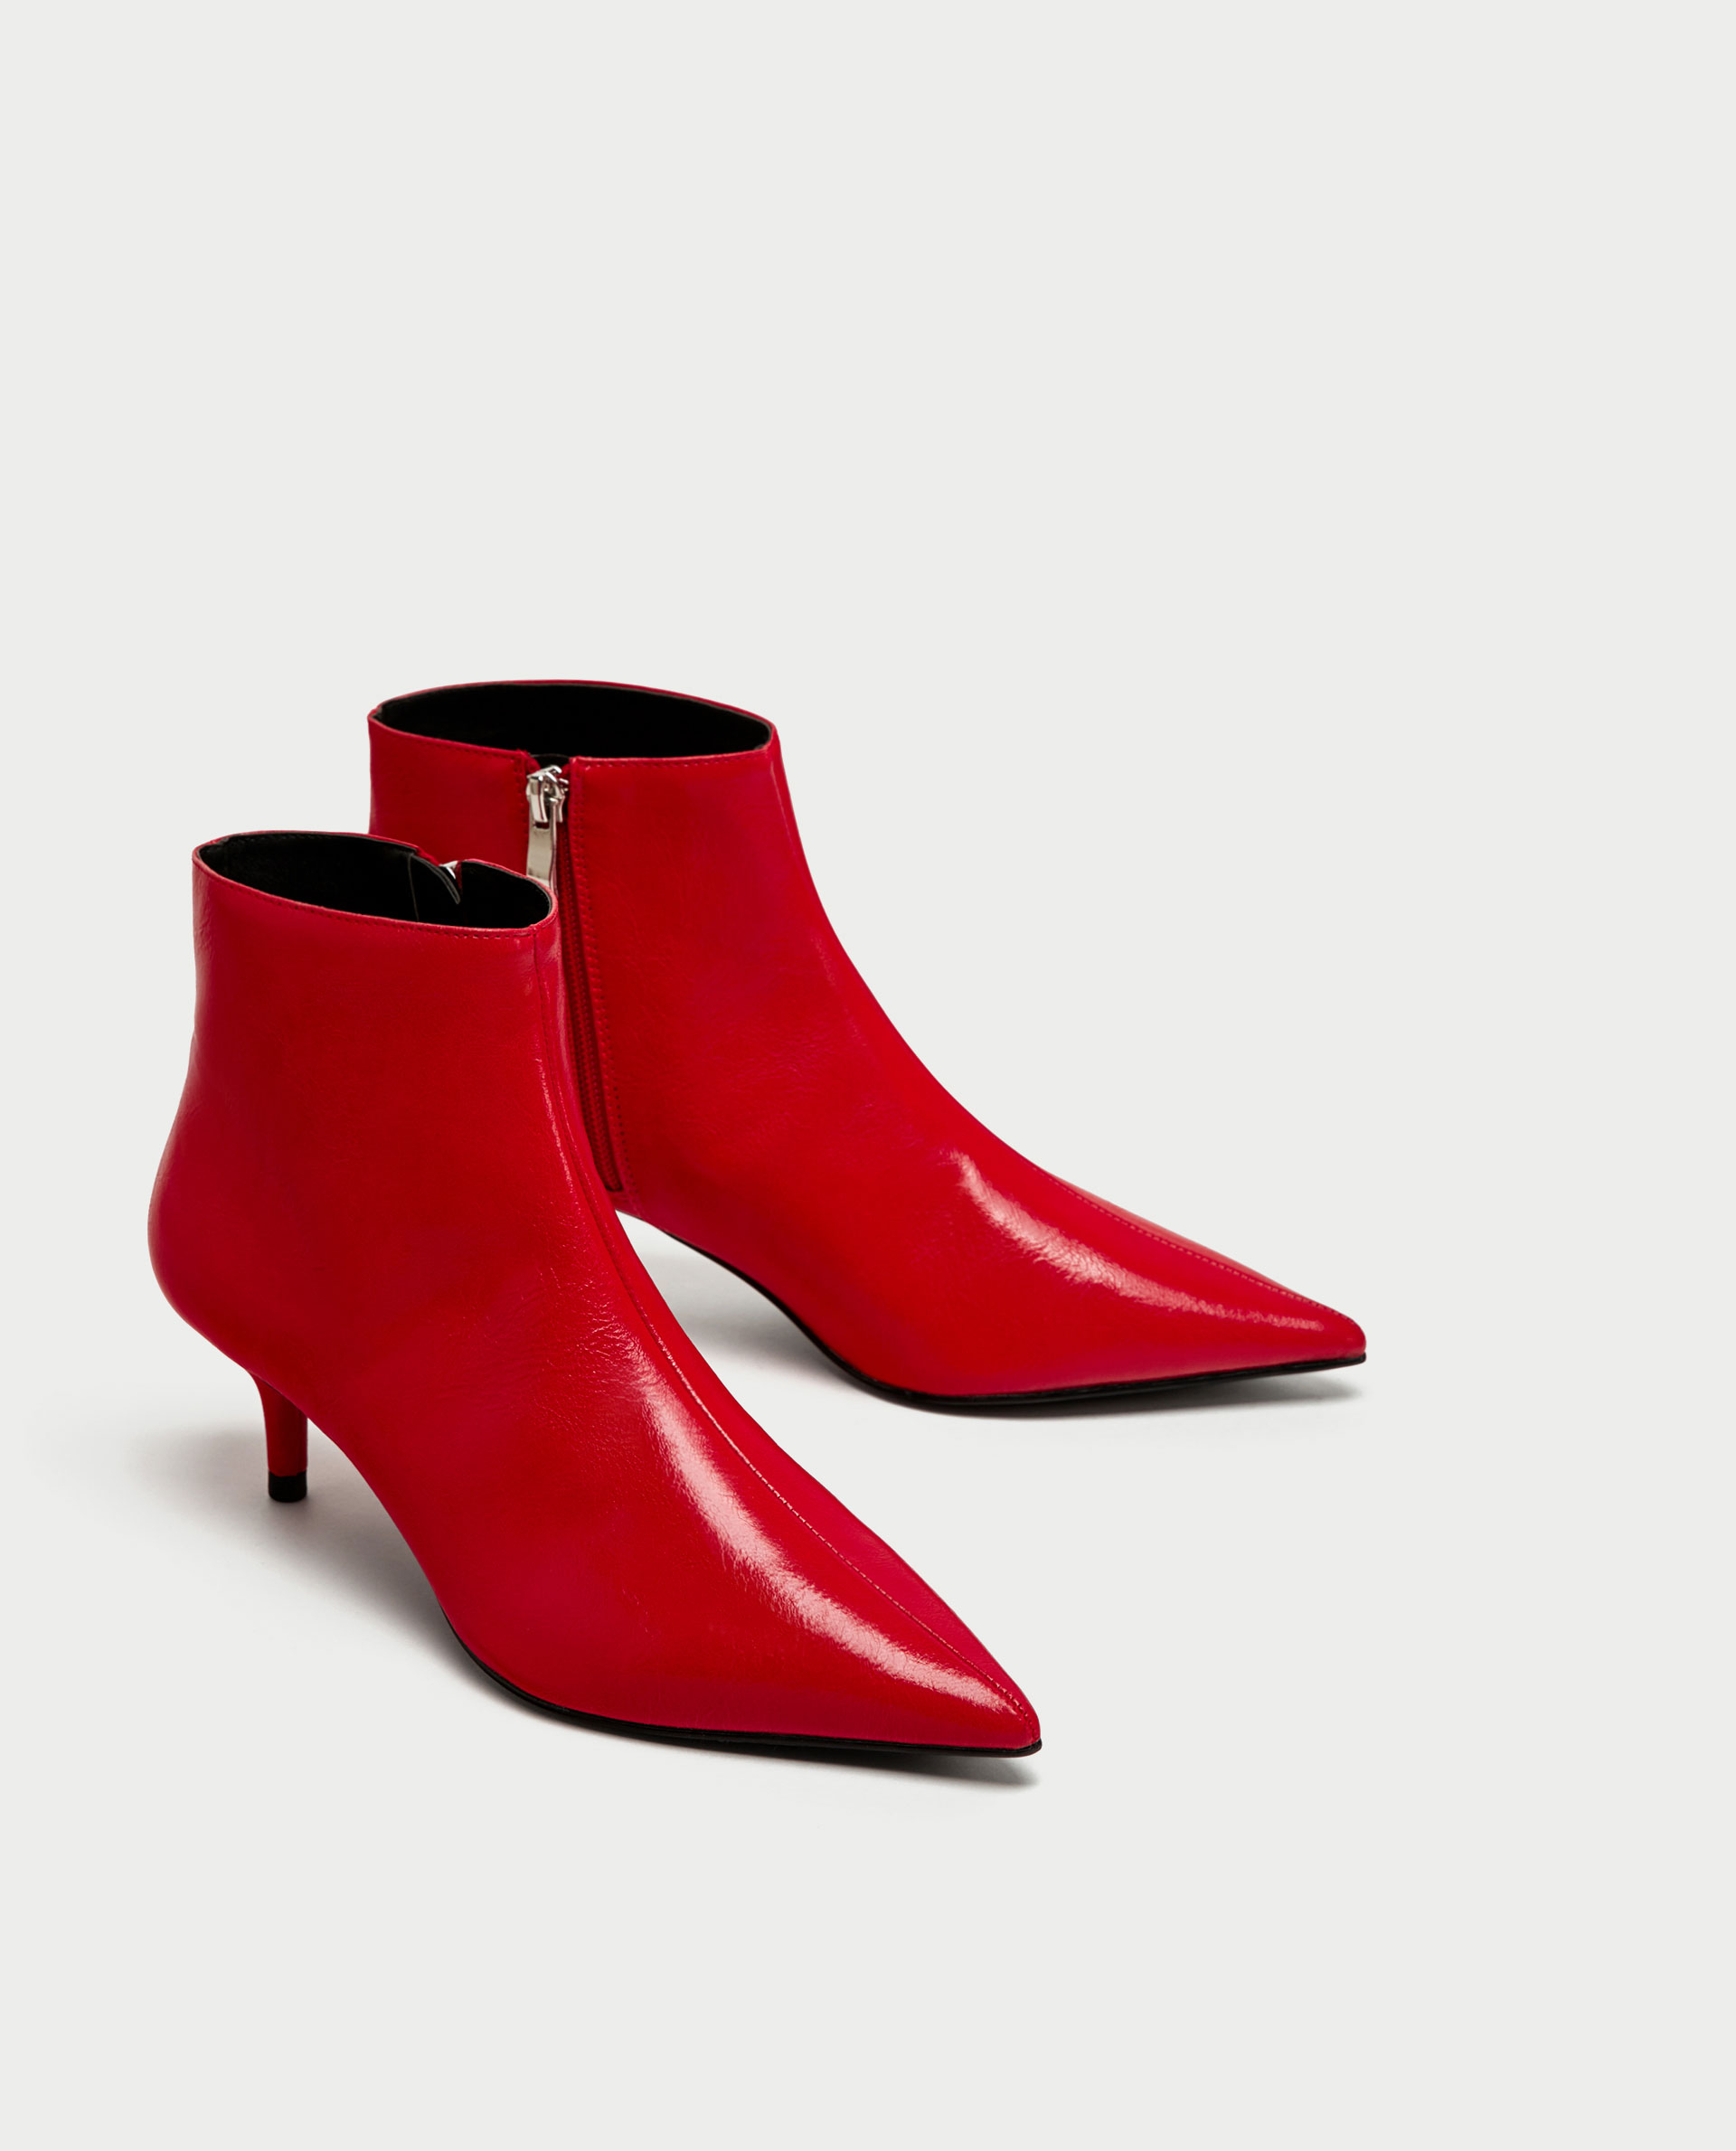 In Her SHOES: Red Ankle Boots - Mama In Heels